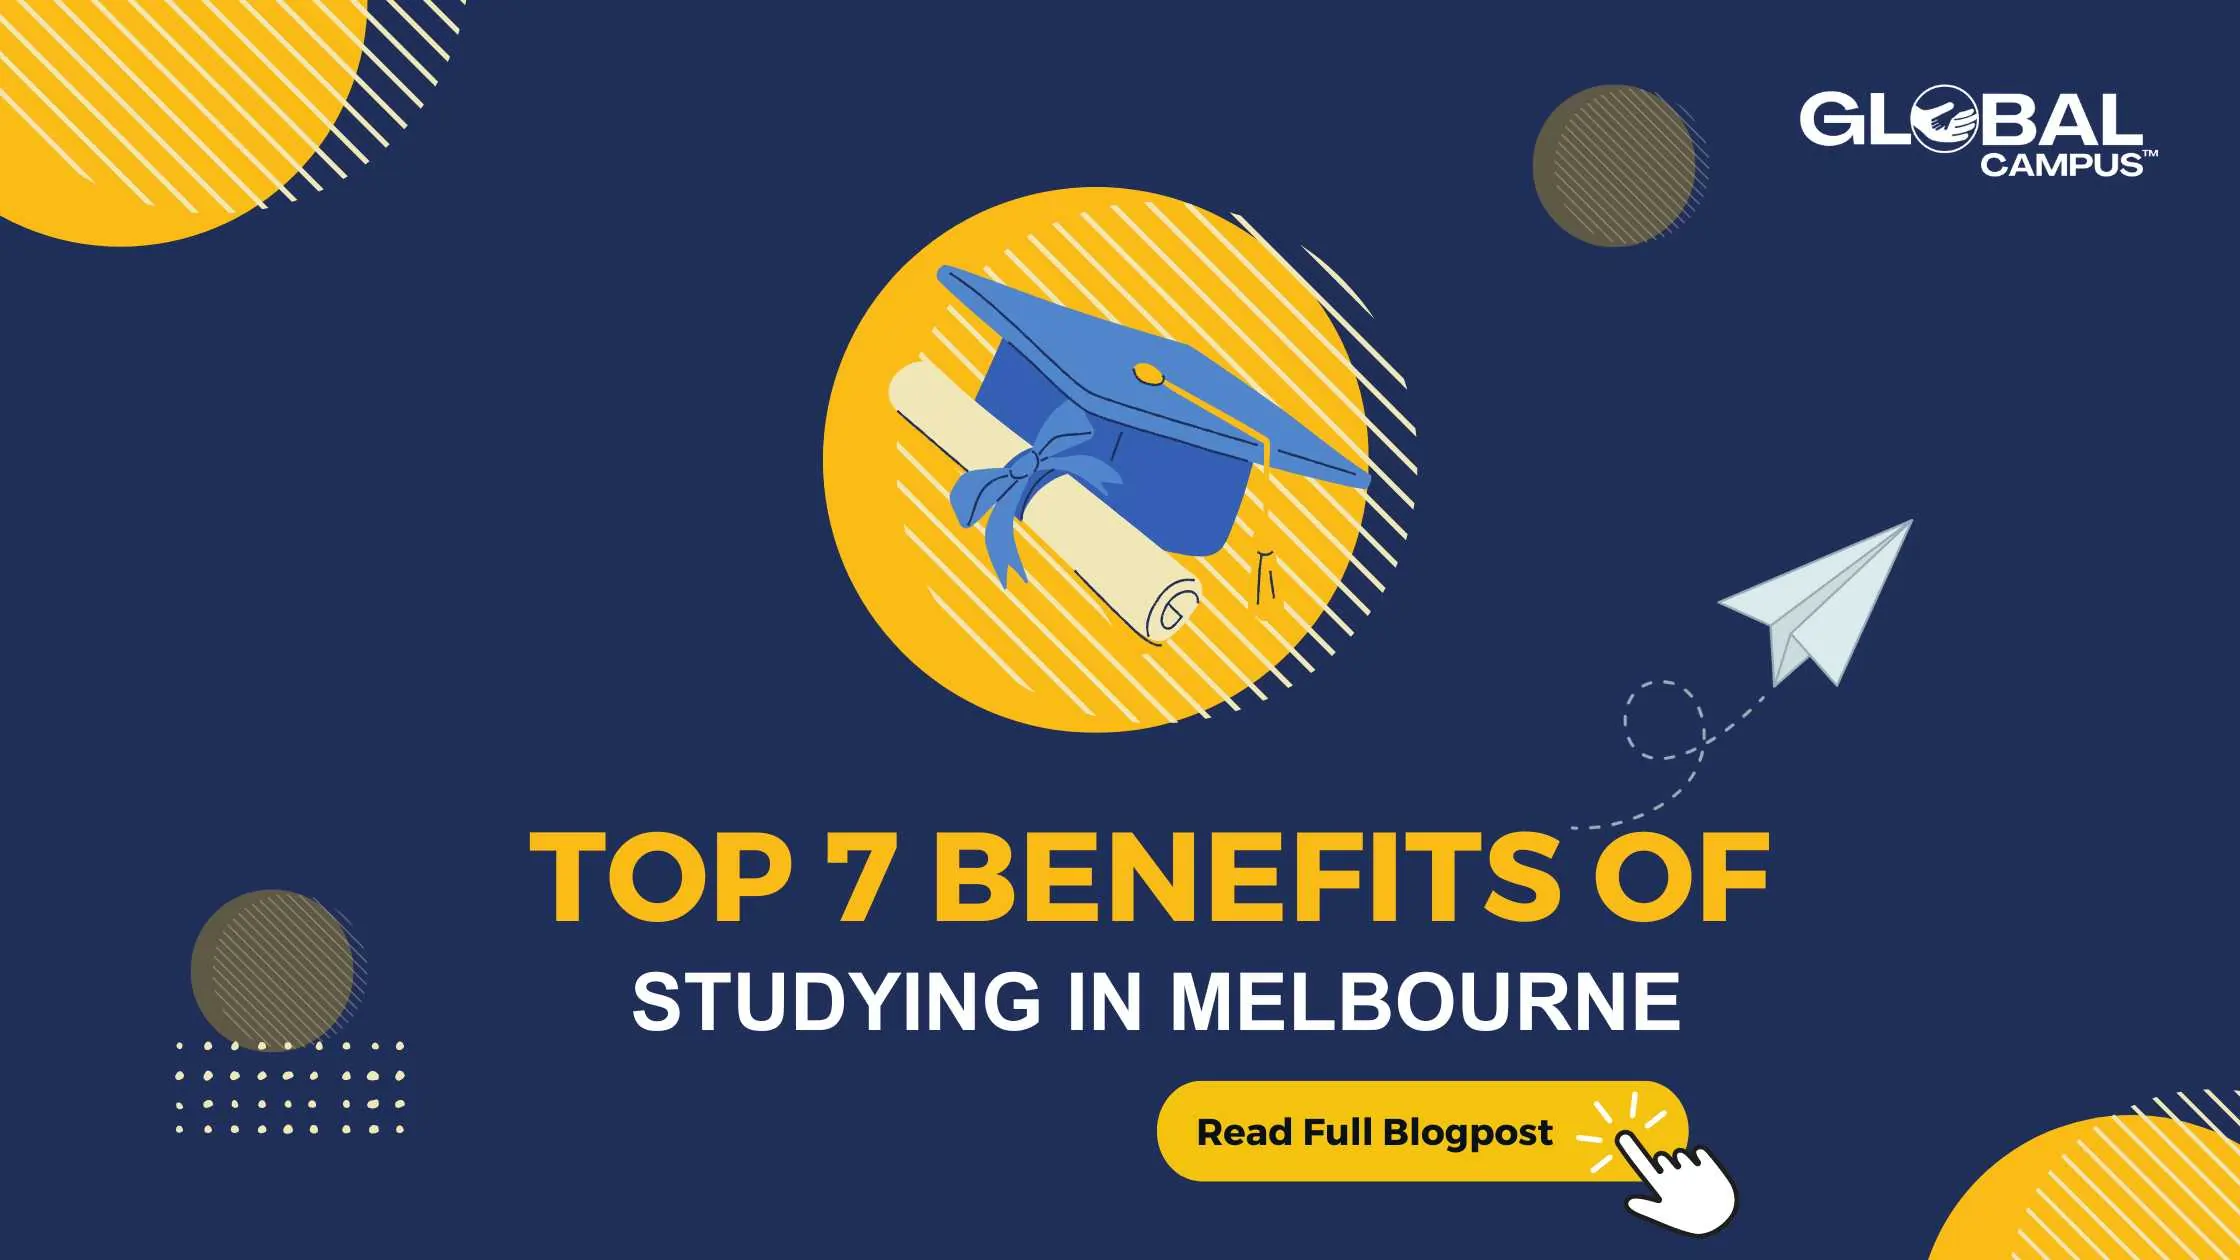 A graduation hat & degree certificate depicting the top benefits of studying & living in Melbourne, Australia.